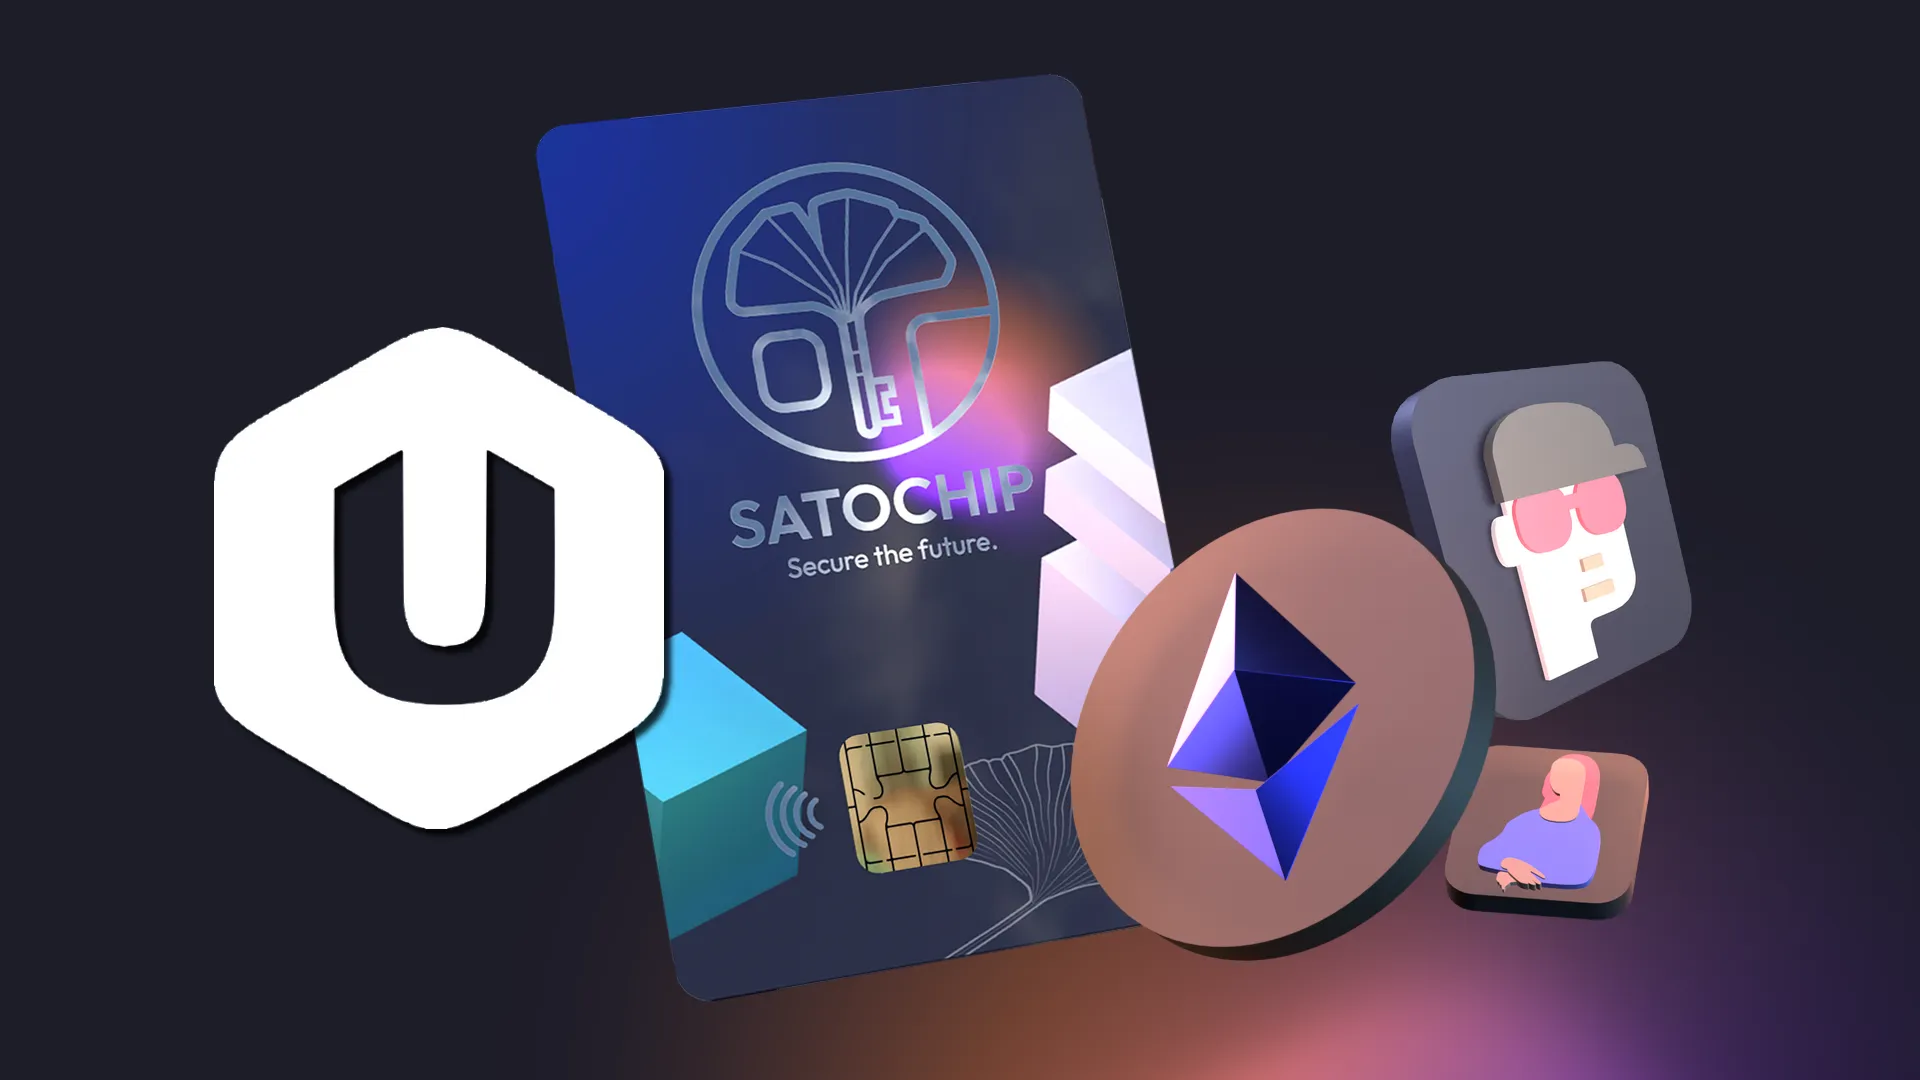 Satochip is natively supported by Uniblow for Ehereum, ERC-20 tokens and EVM compatible networks.